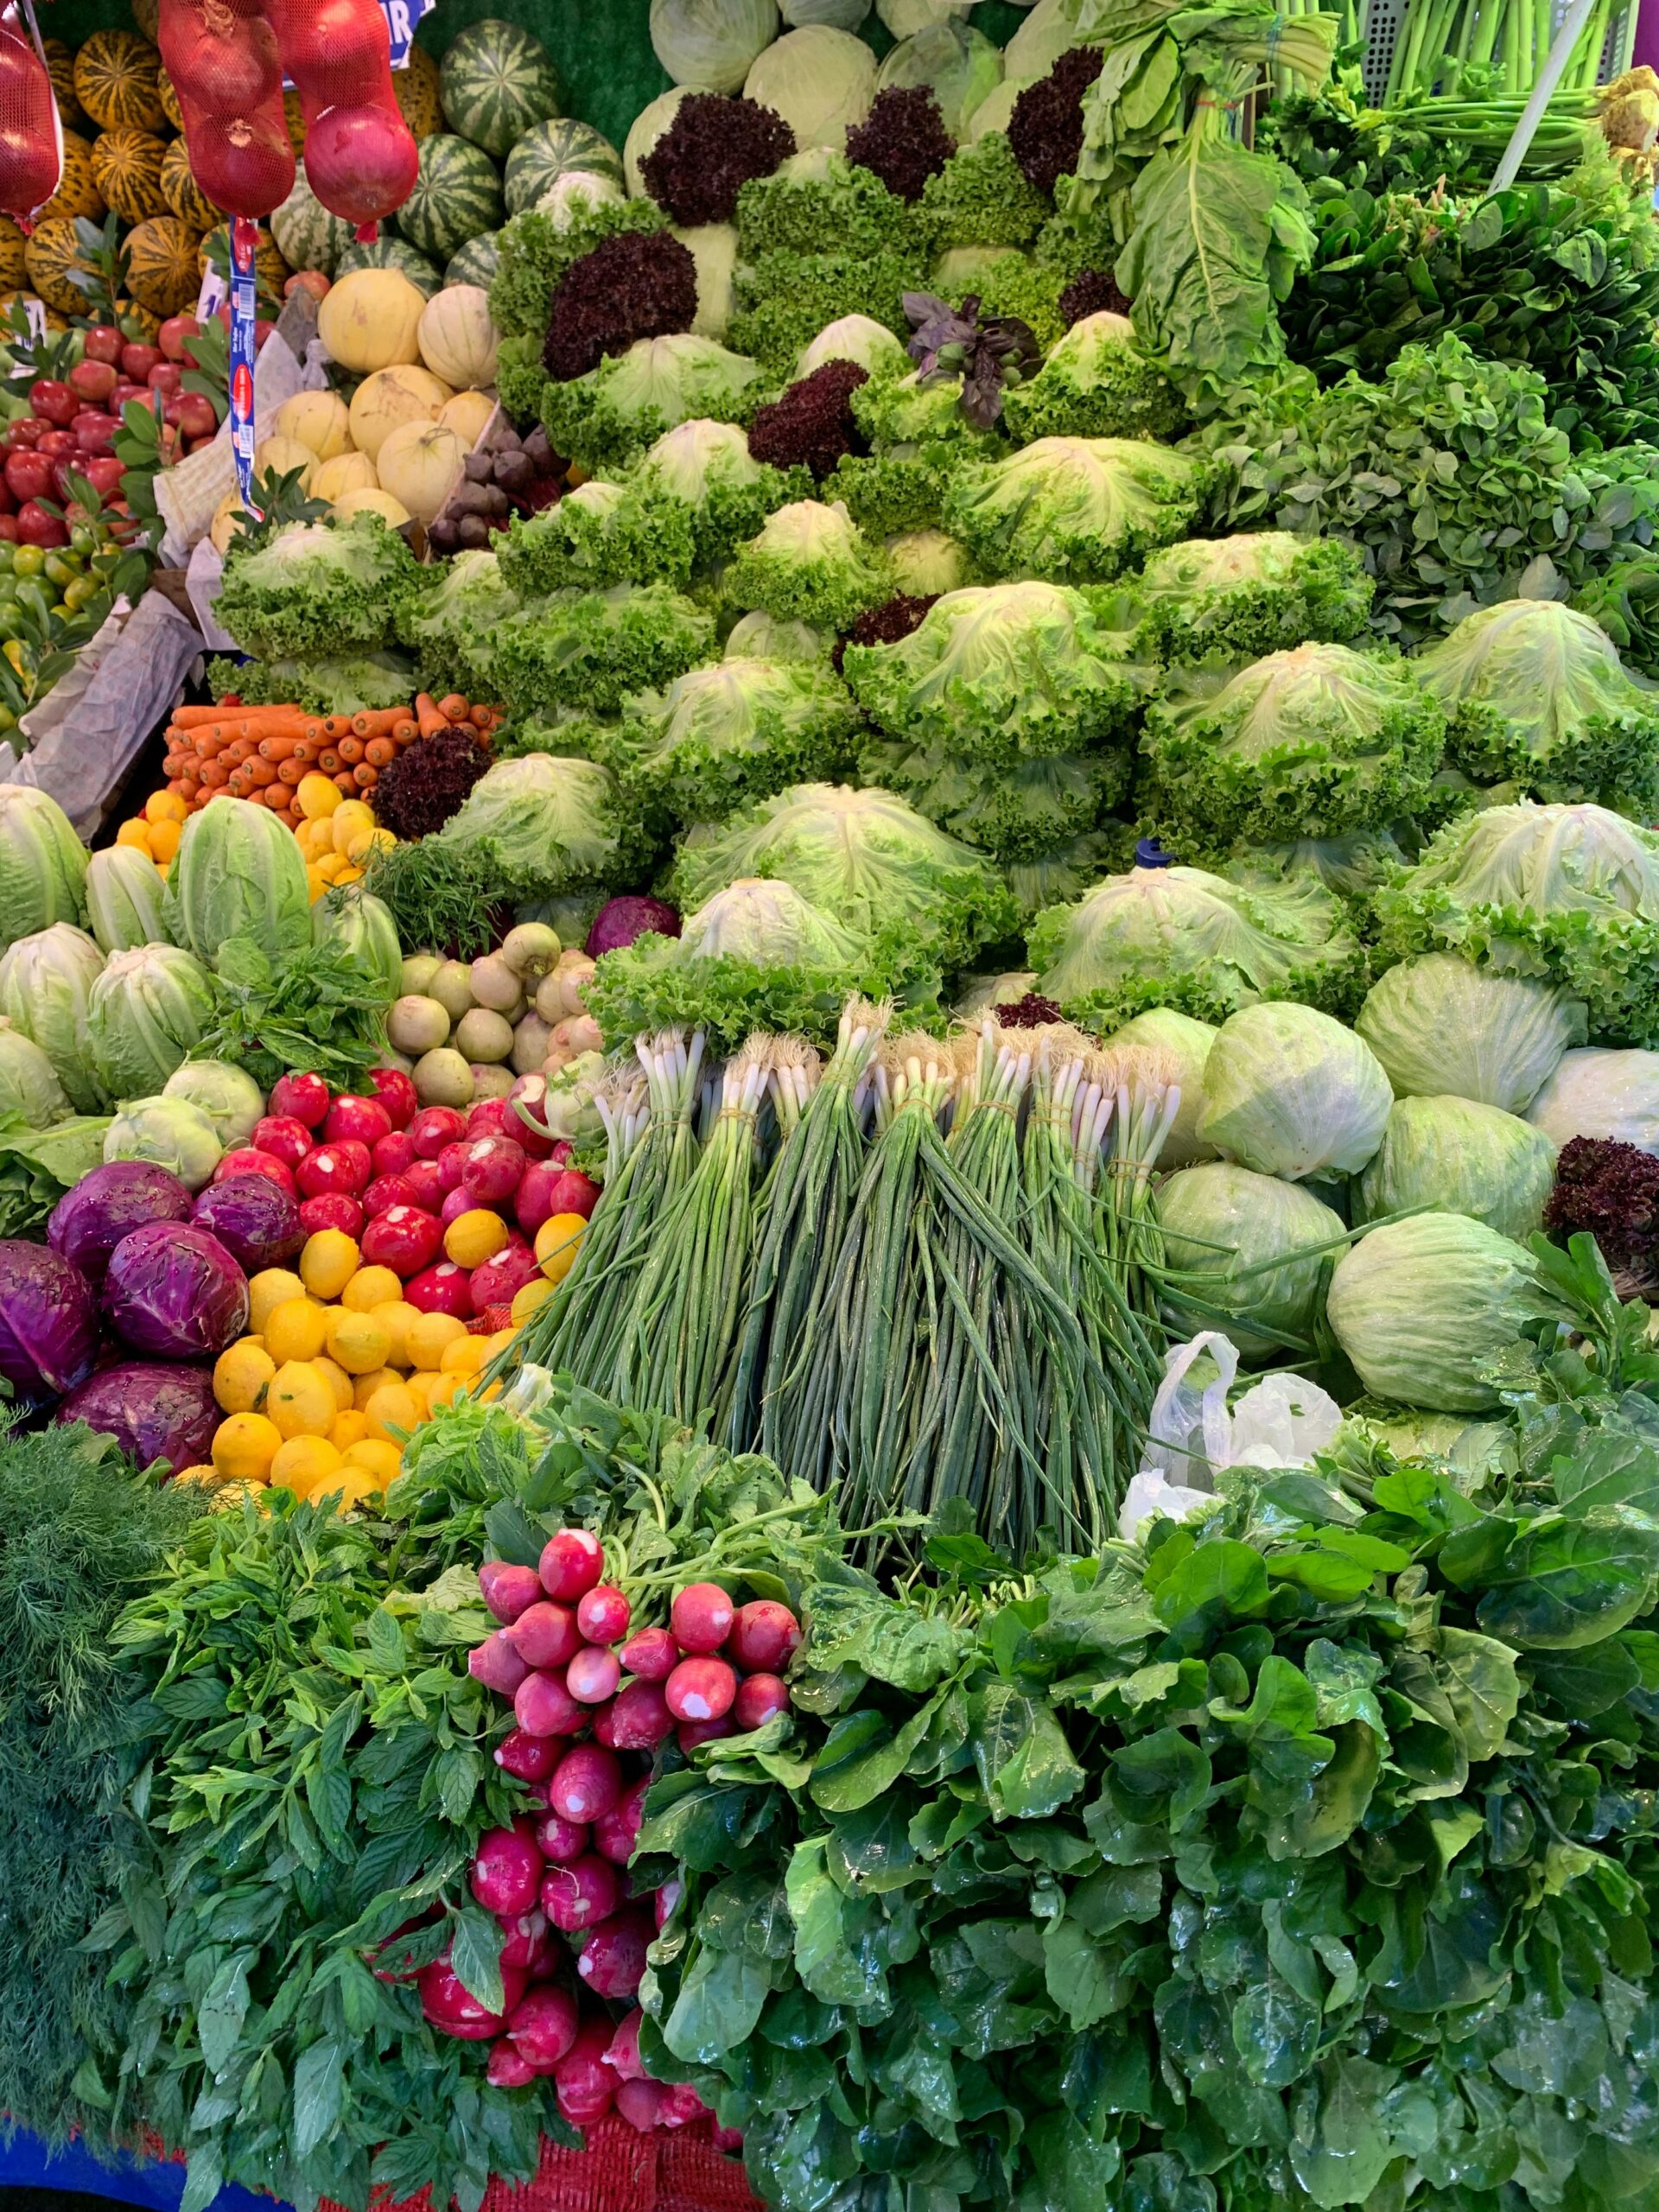 Finding a Reliable Vegetable Shop Near You